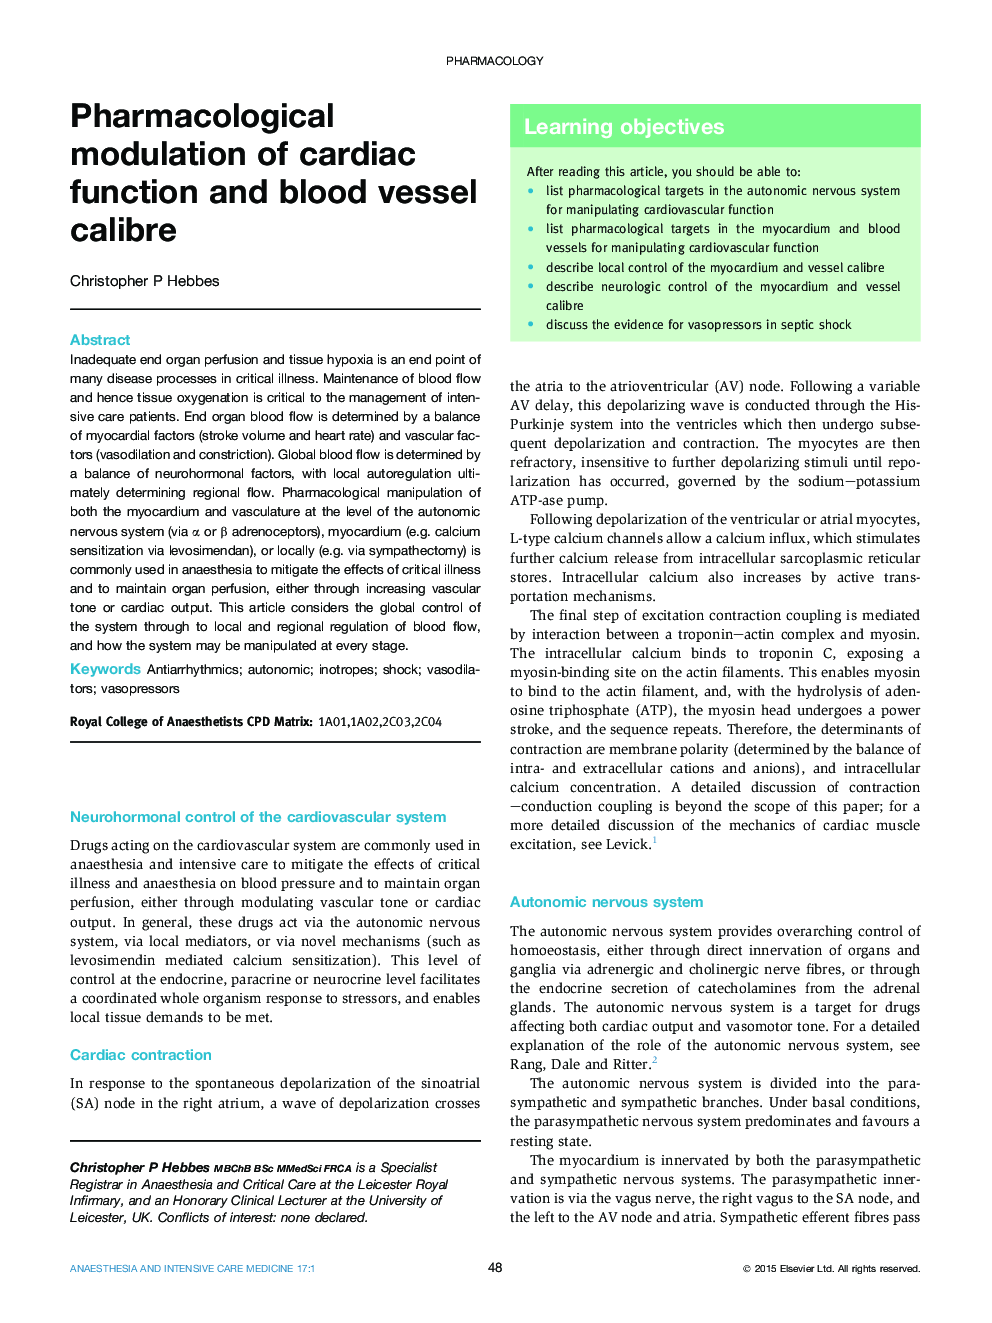 Pharmacological modulation of cardiac function and blood vessel calibre